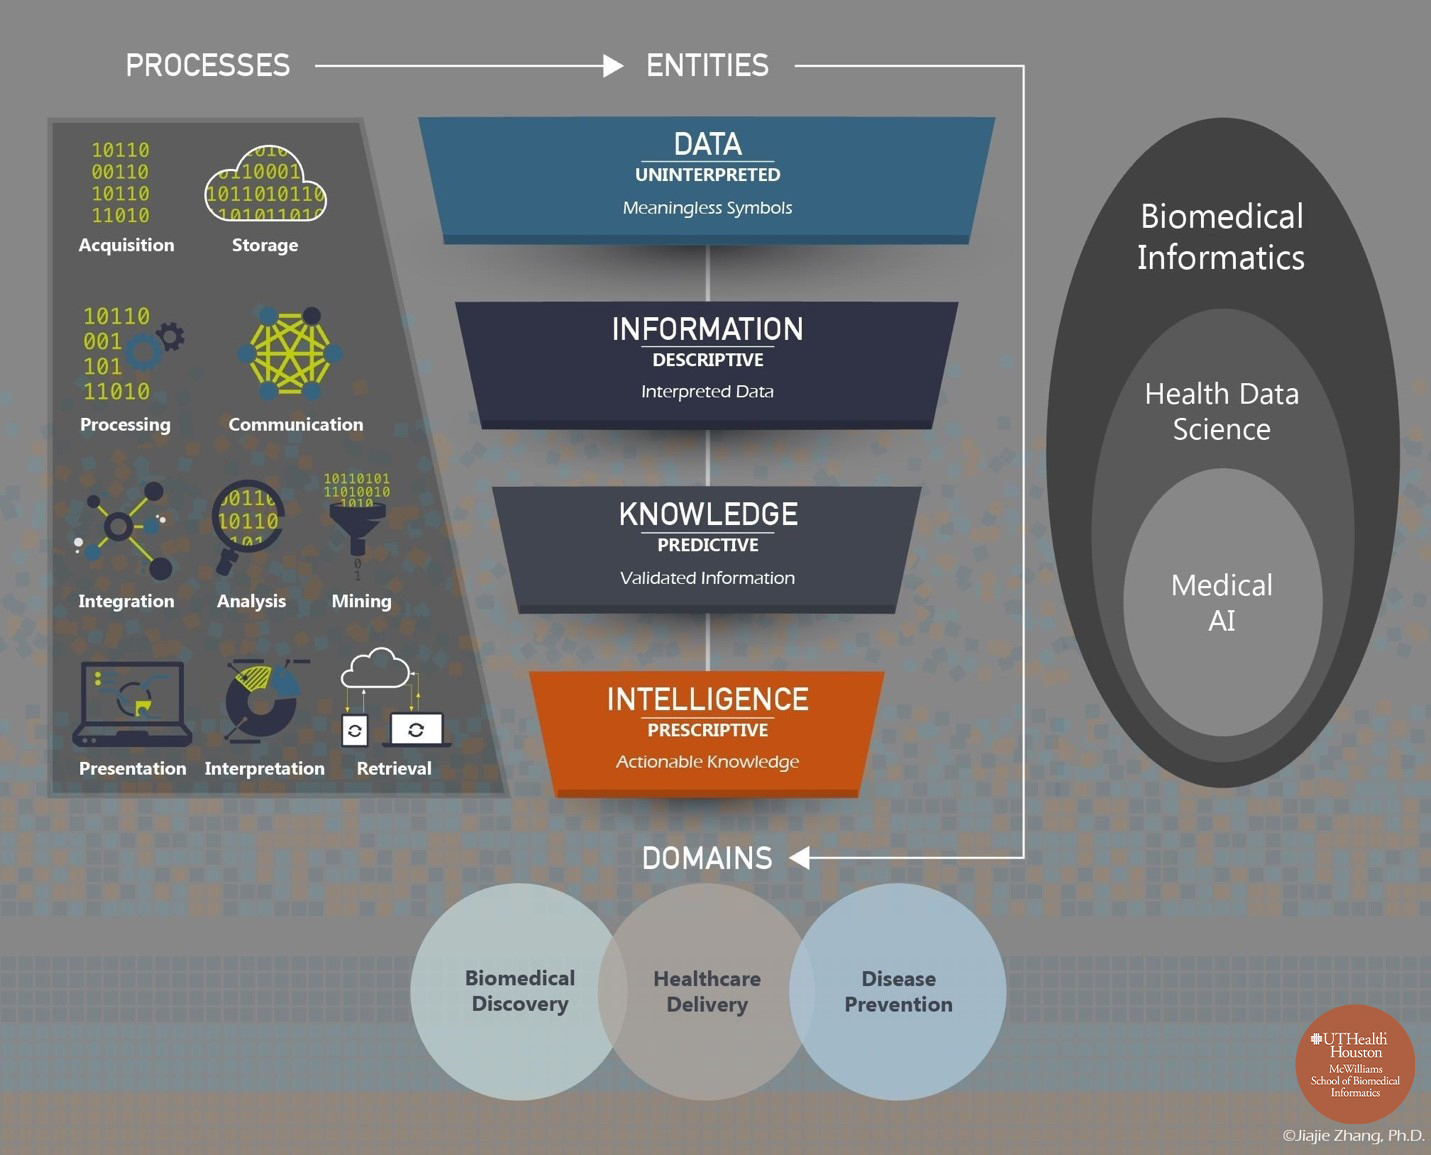 Figure depicting the relationship between biomedical informatics, health data science, and medical AI